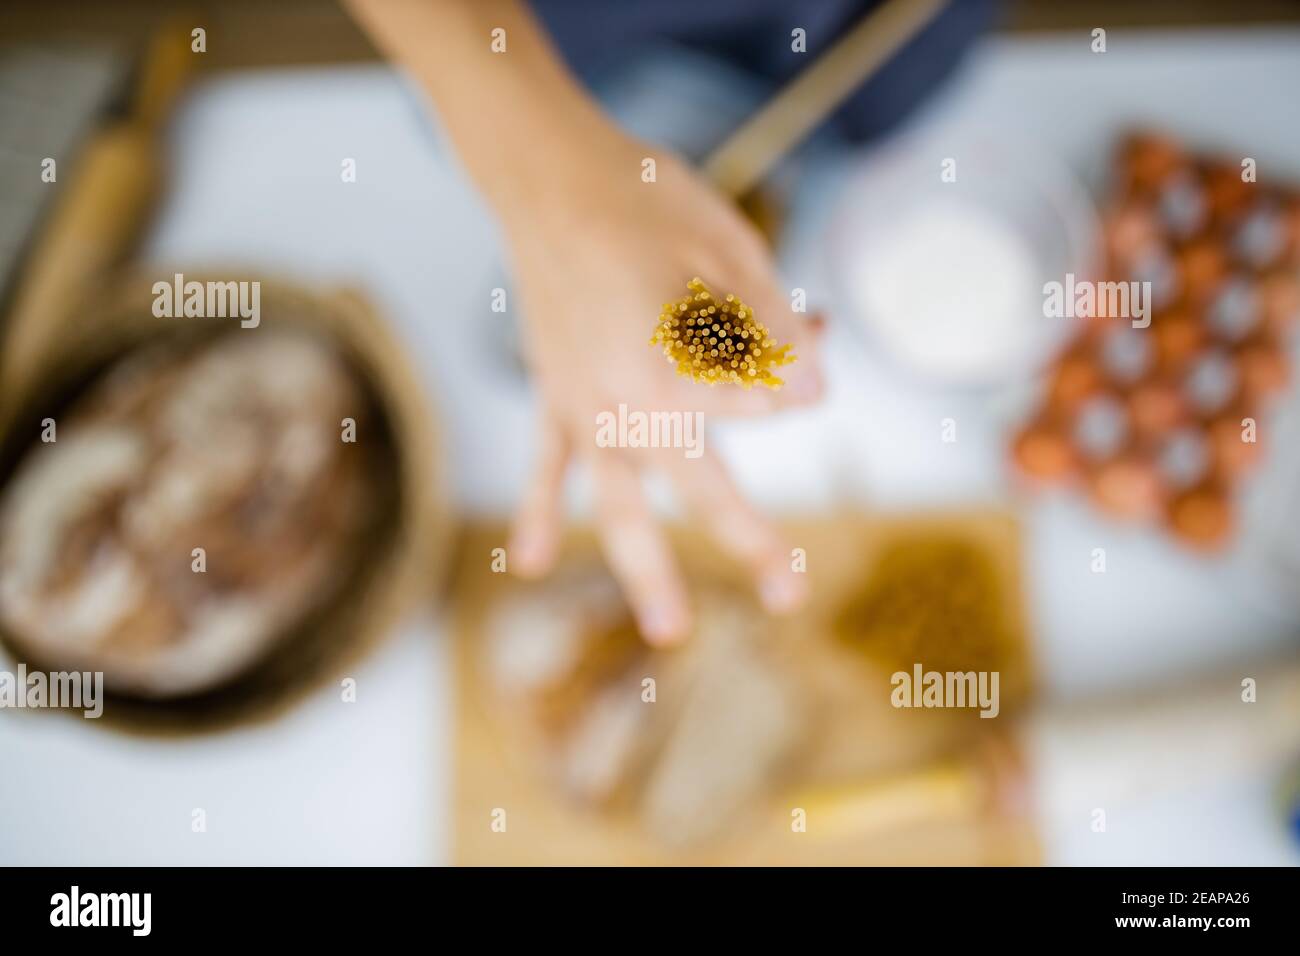 Female hand holding uncooked spaghetti above ingredients on a table Stock Photo